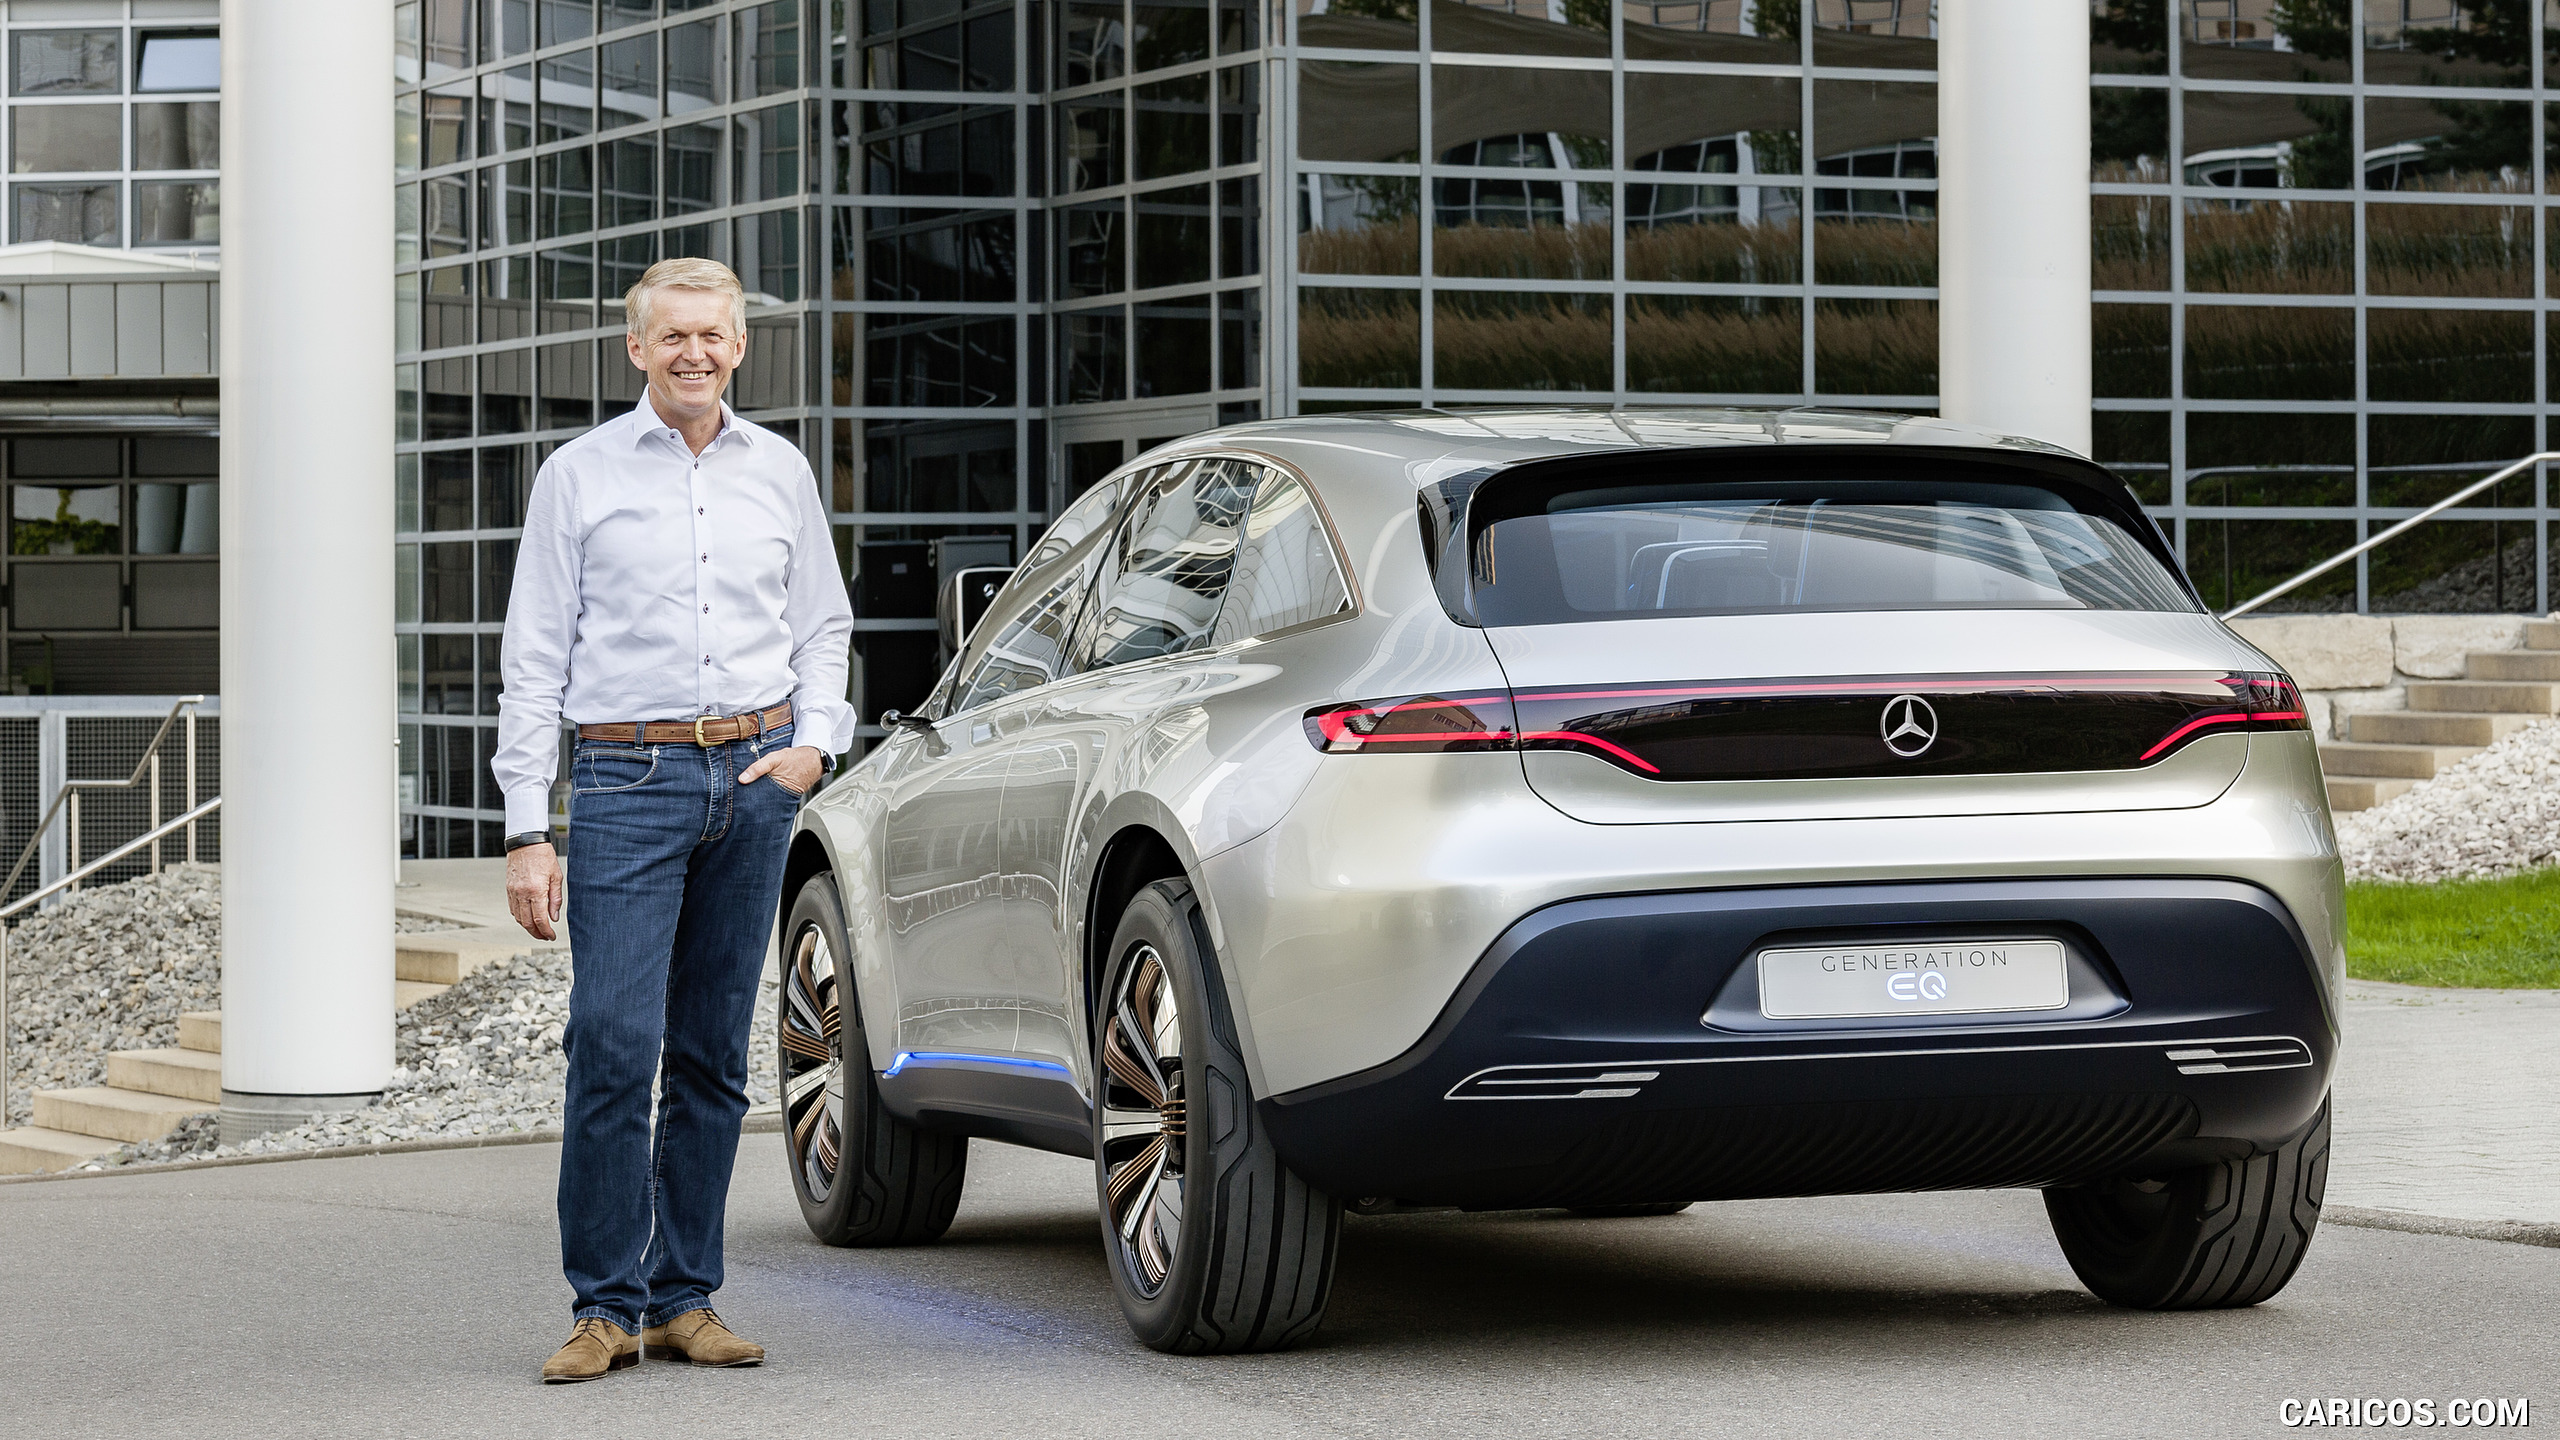 2016 Mercedes-Benz Generation EQ SUV Concept and Prof. Dr. Thomas Weber, #48 of 50